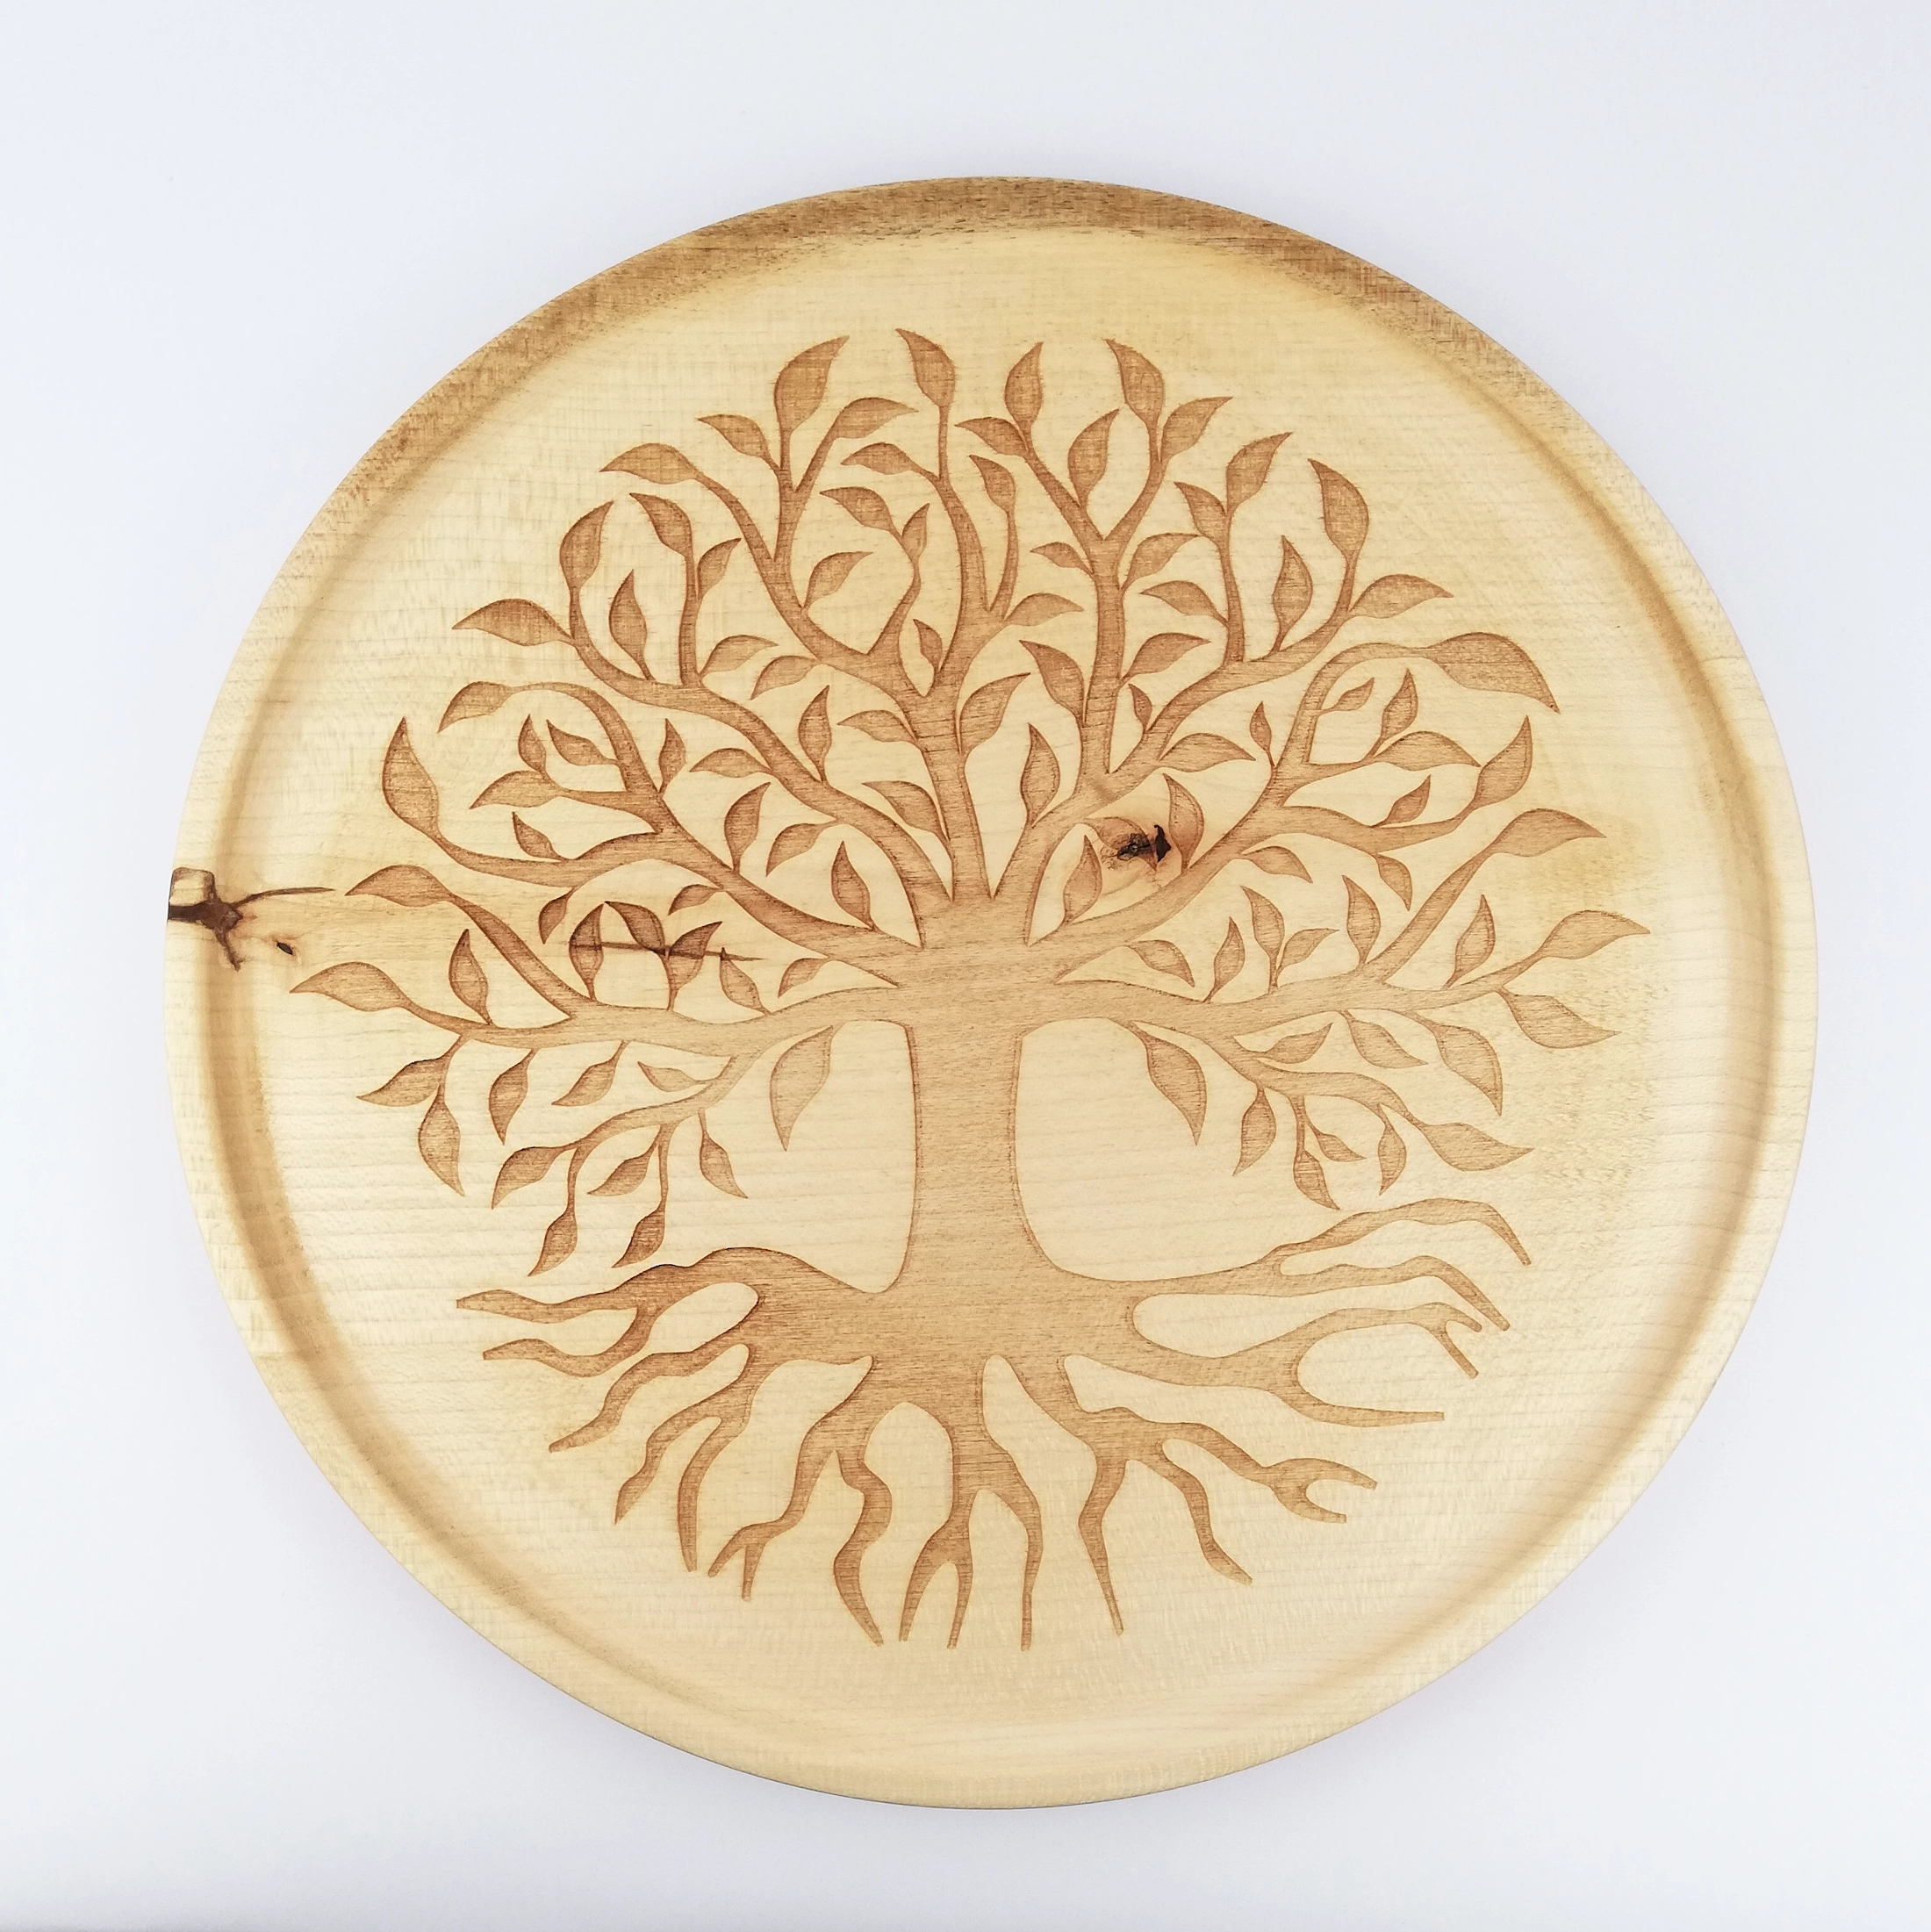 Tree of life (version 2) on a big plate (30cm/11.8in in diameter), front.